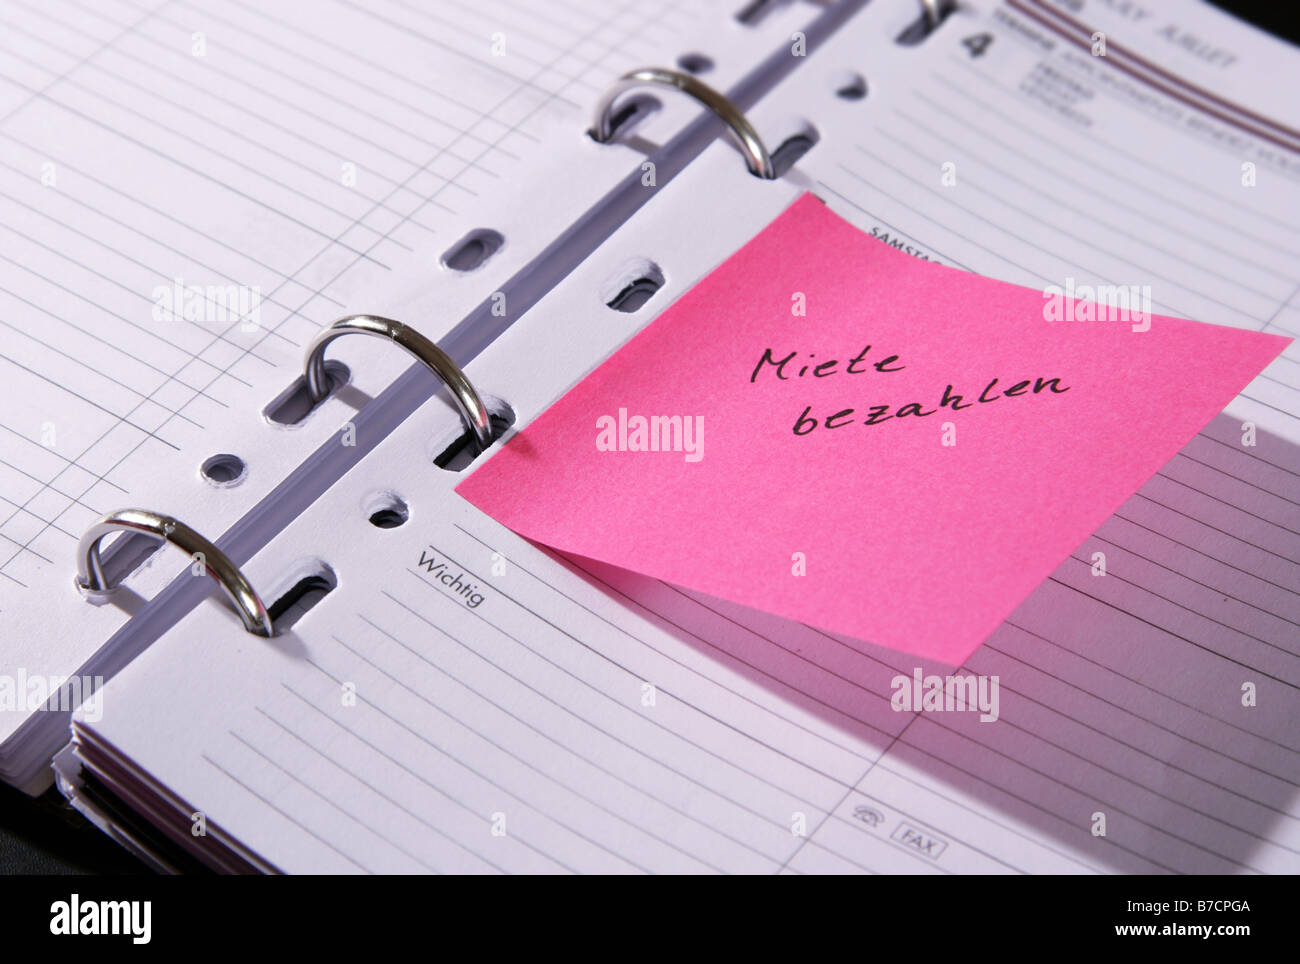 appointment book 'Miete bezahlen', 'pay rent', Germany Stock Photo